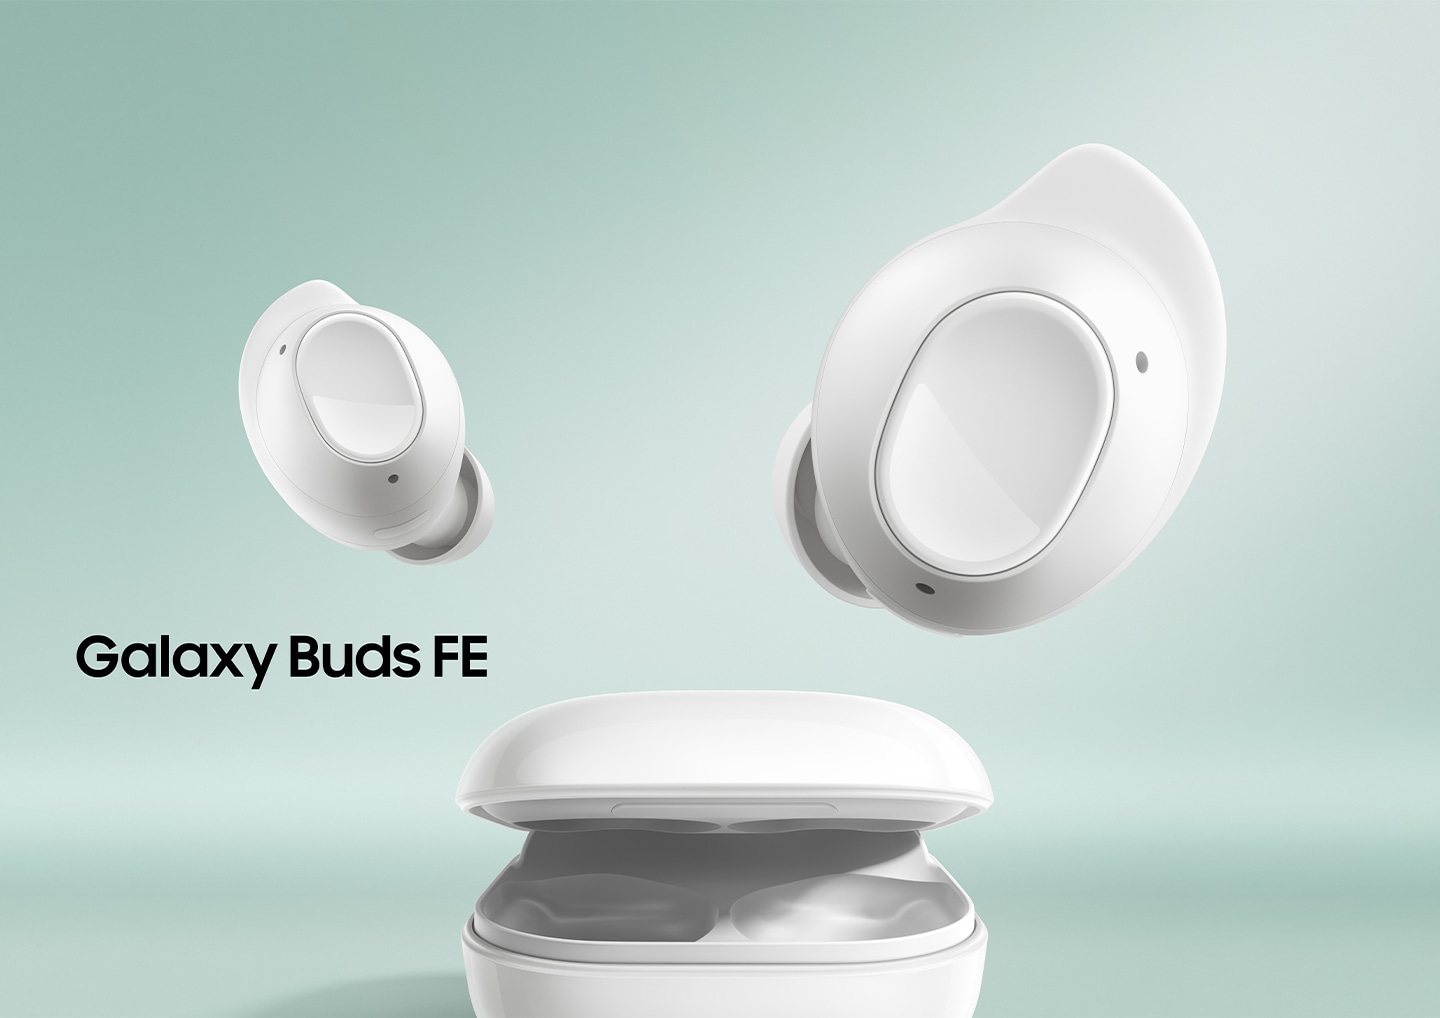 Galaxy Buds FE shown with the two earbuds hovering over the slightly opened charging case.